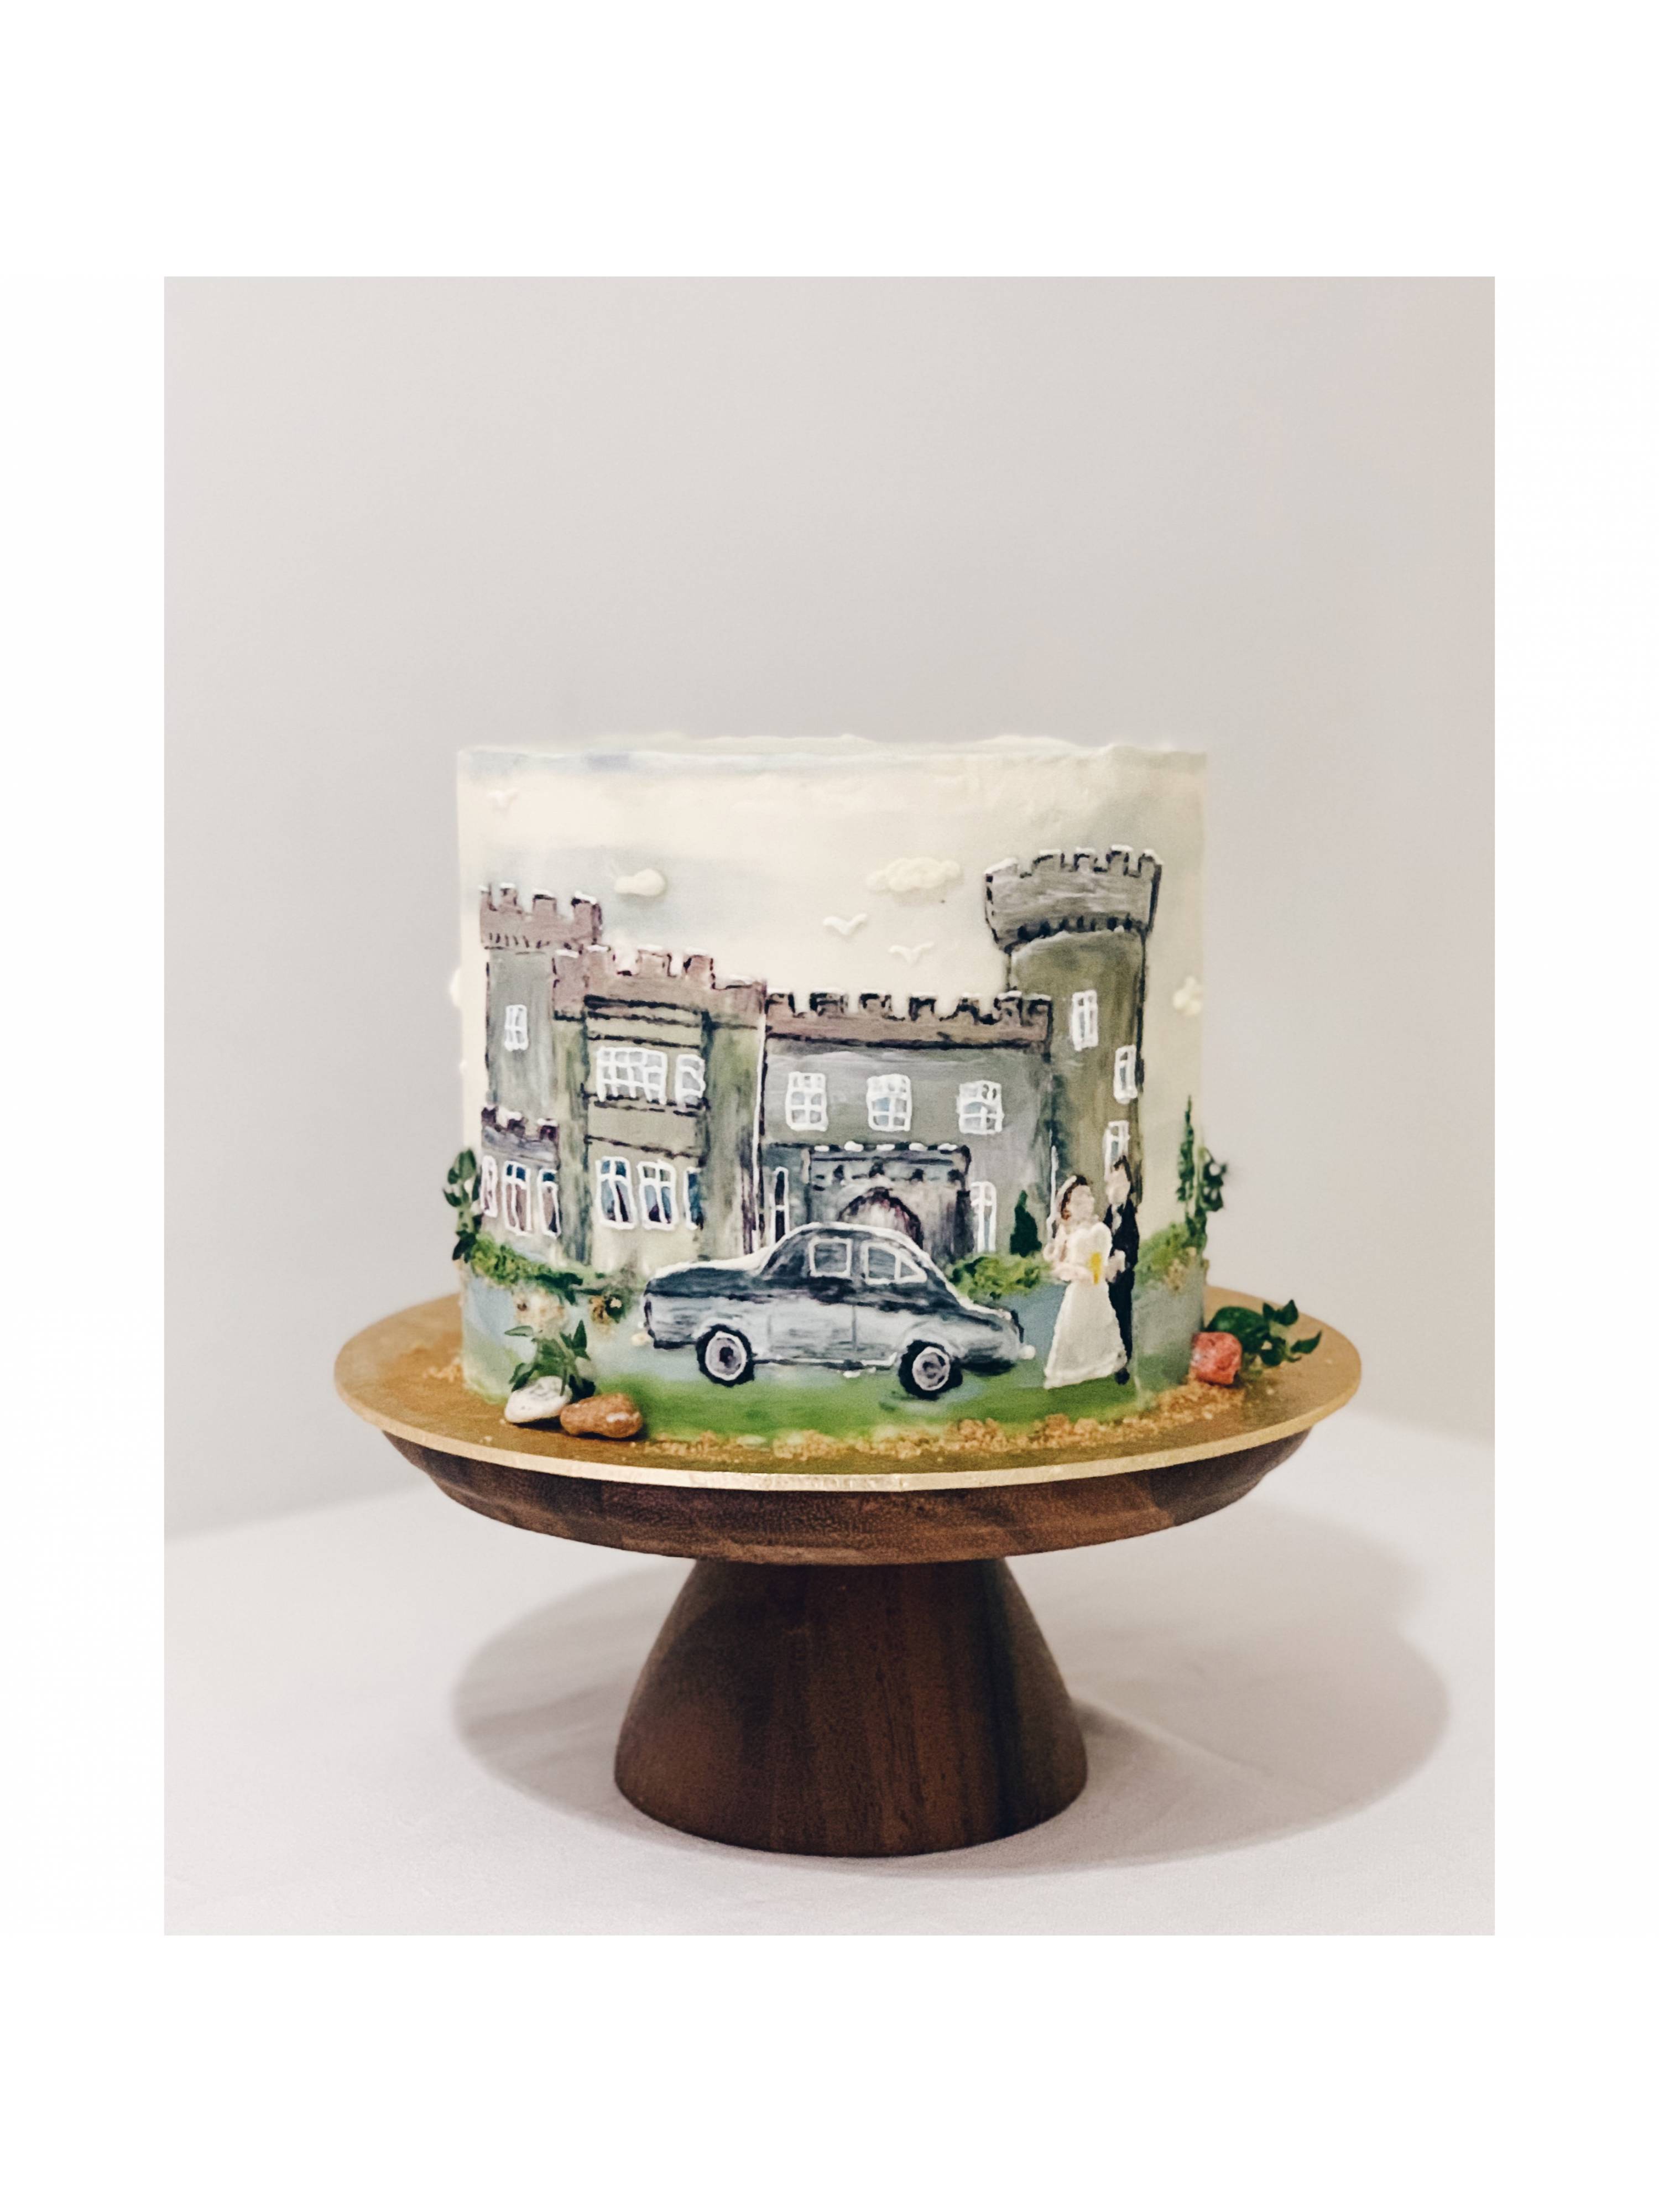 Chateau Painting Cake